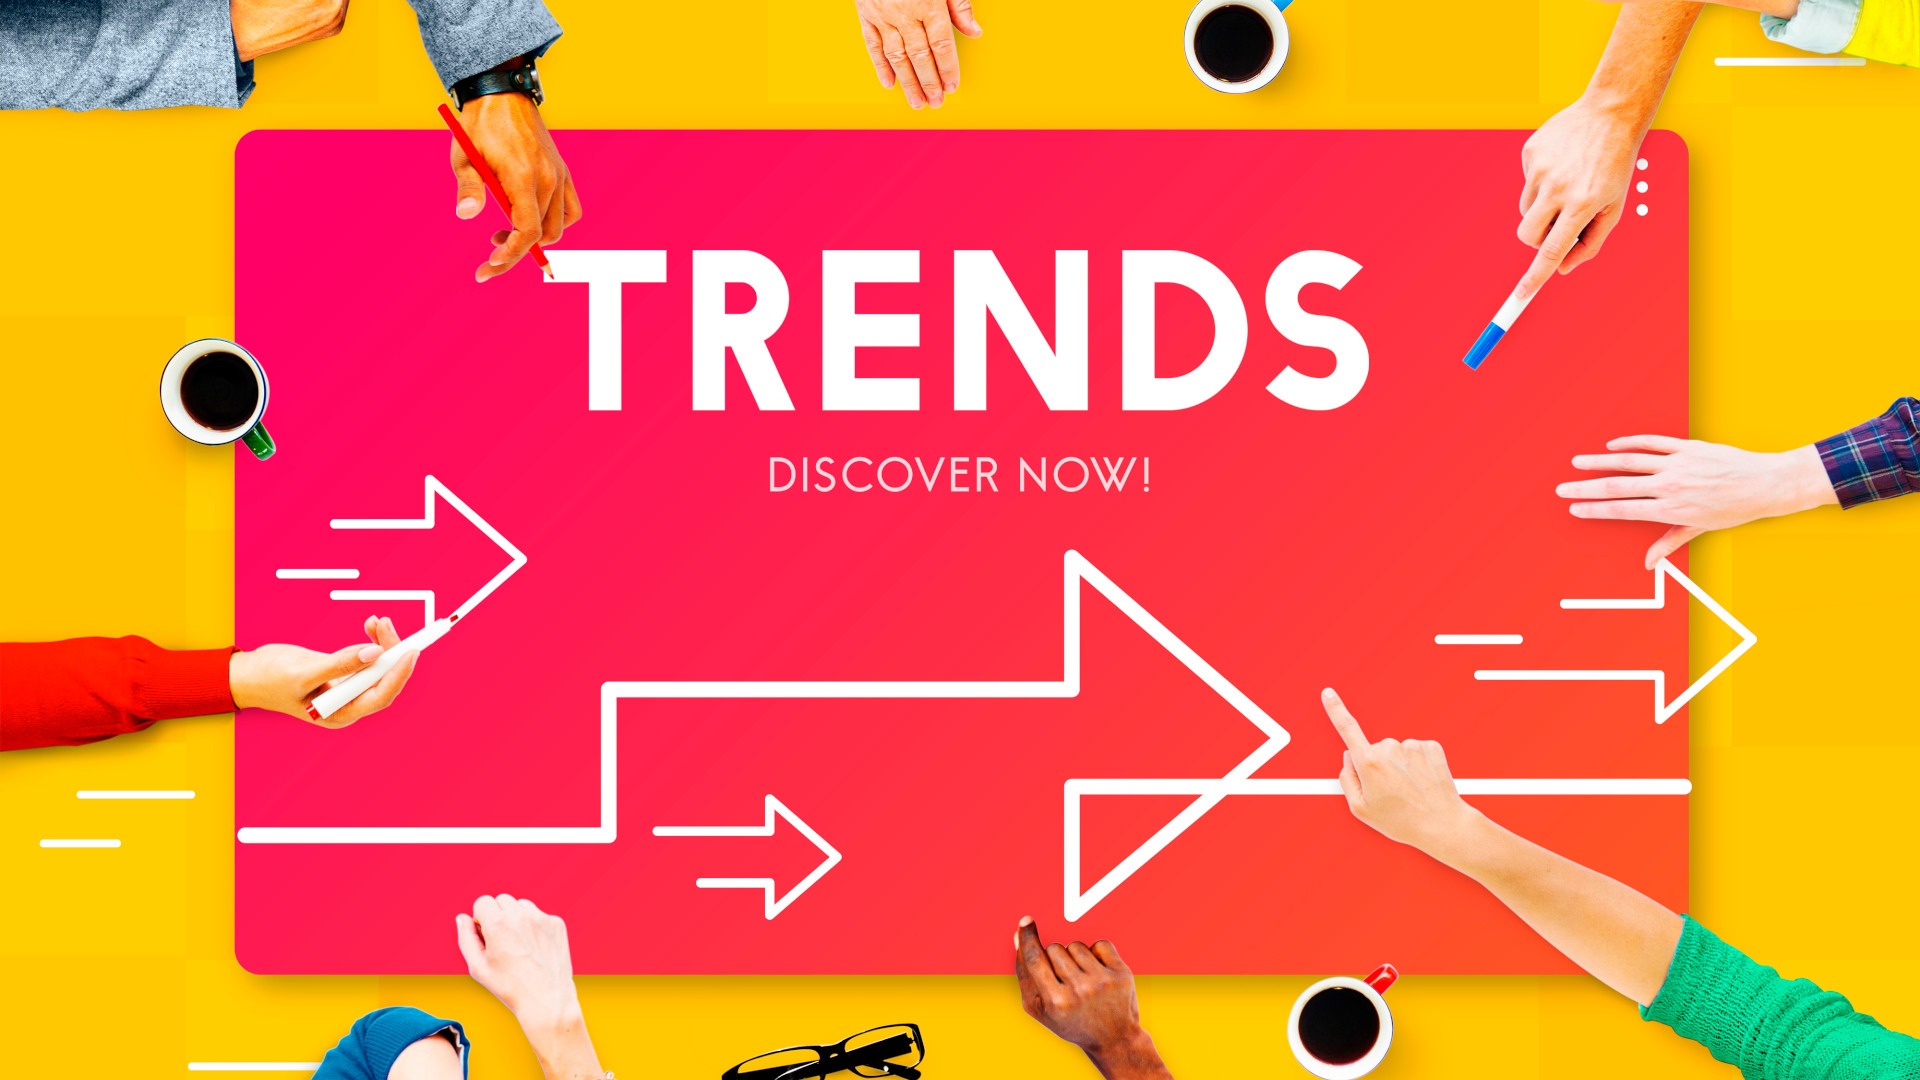 Top Web Design Trends for 2023